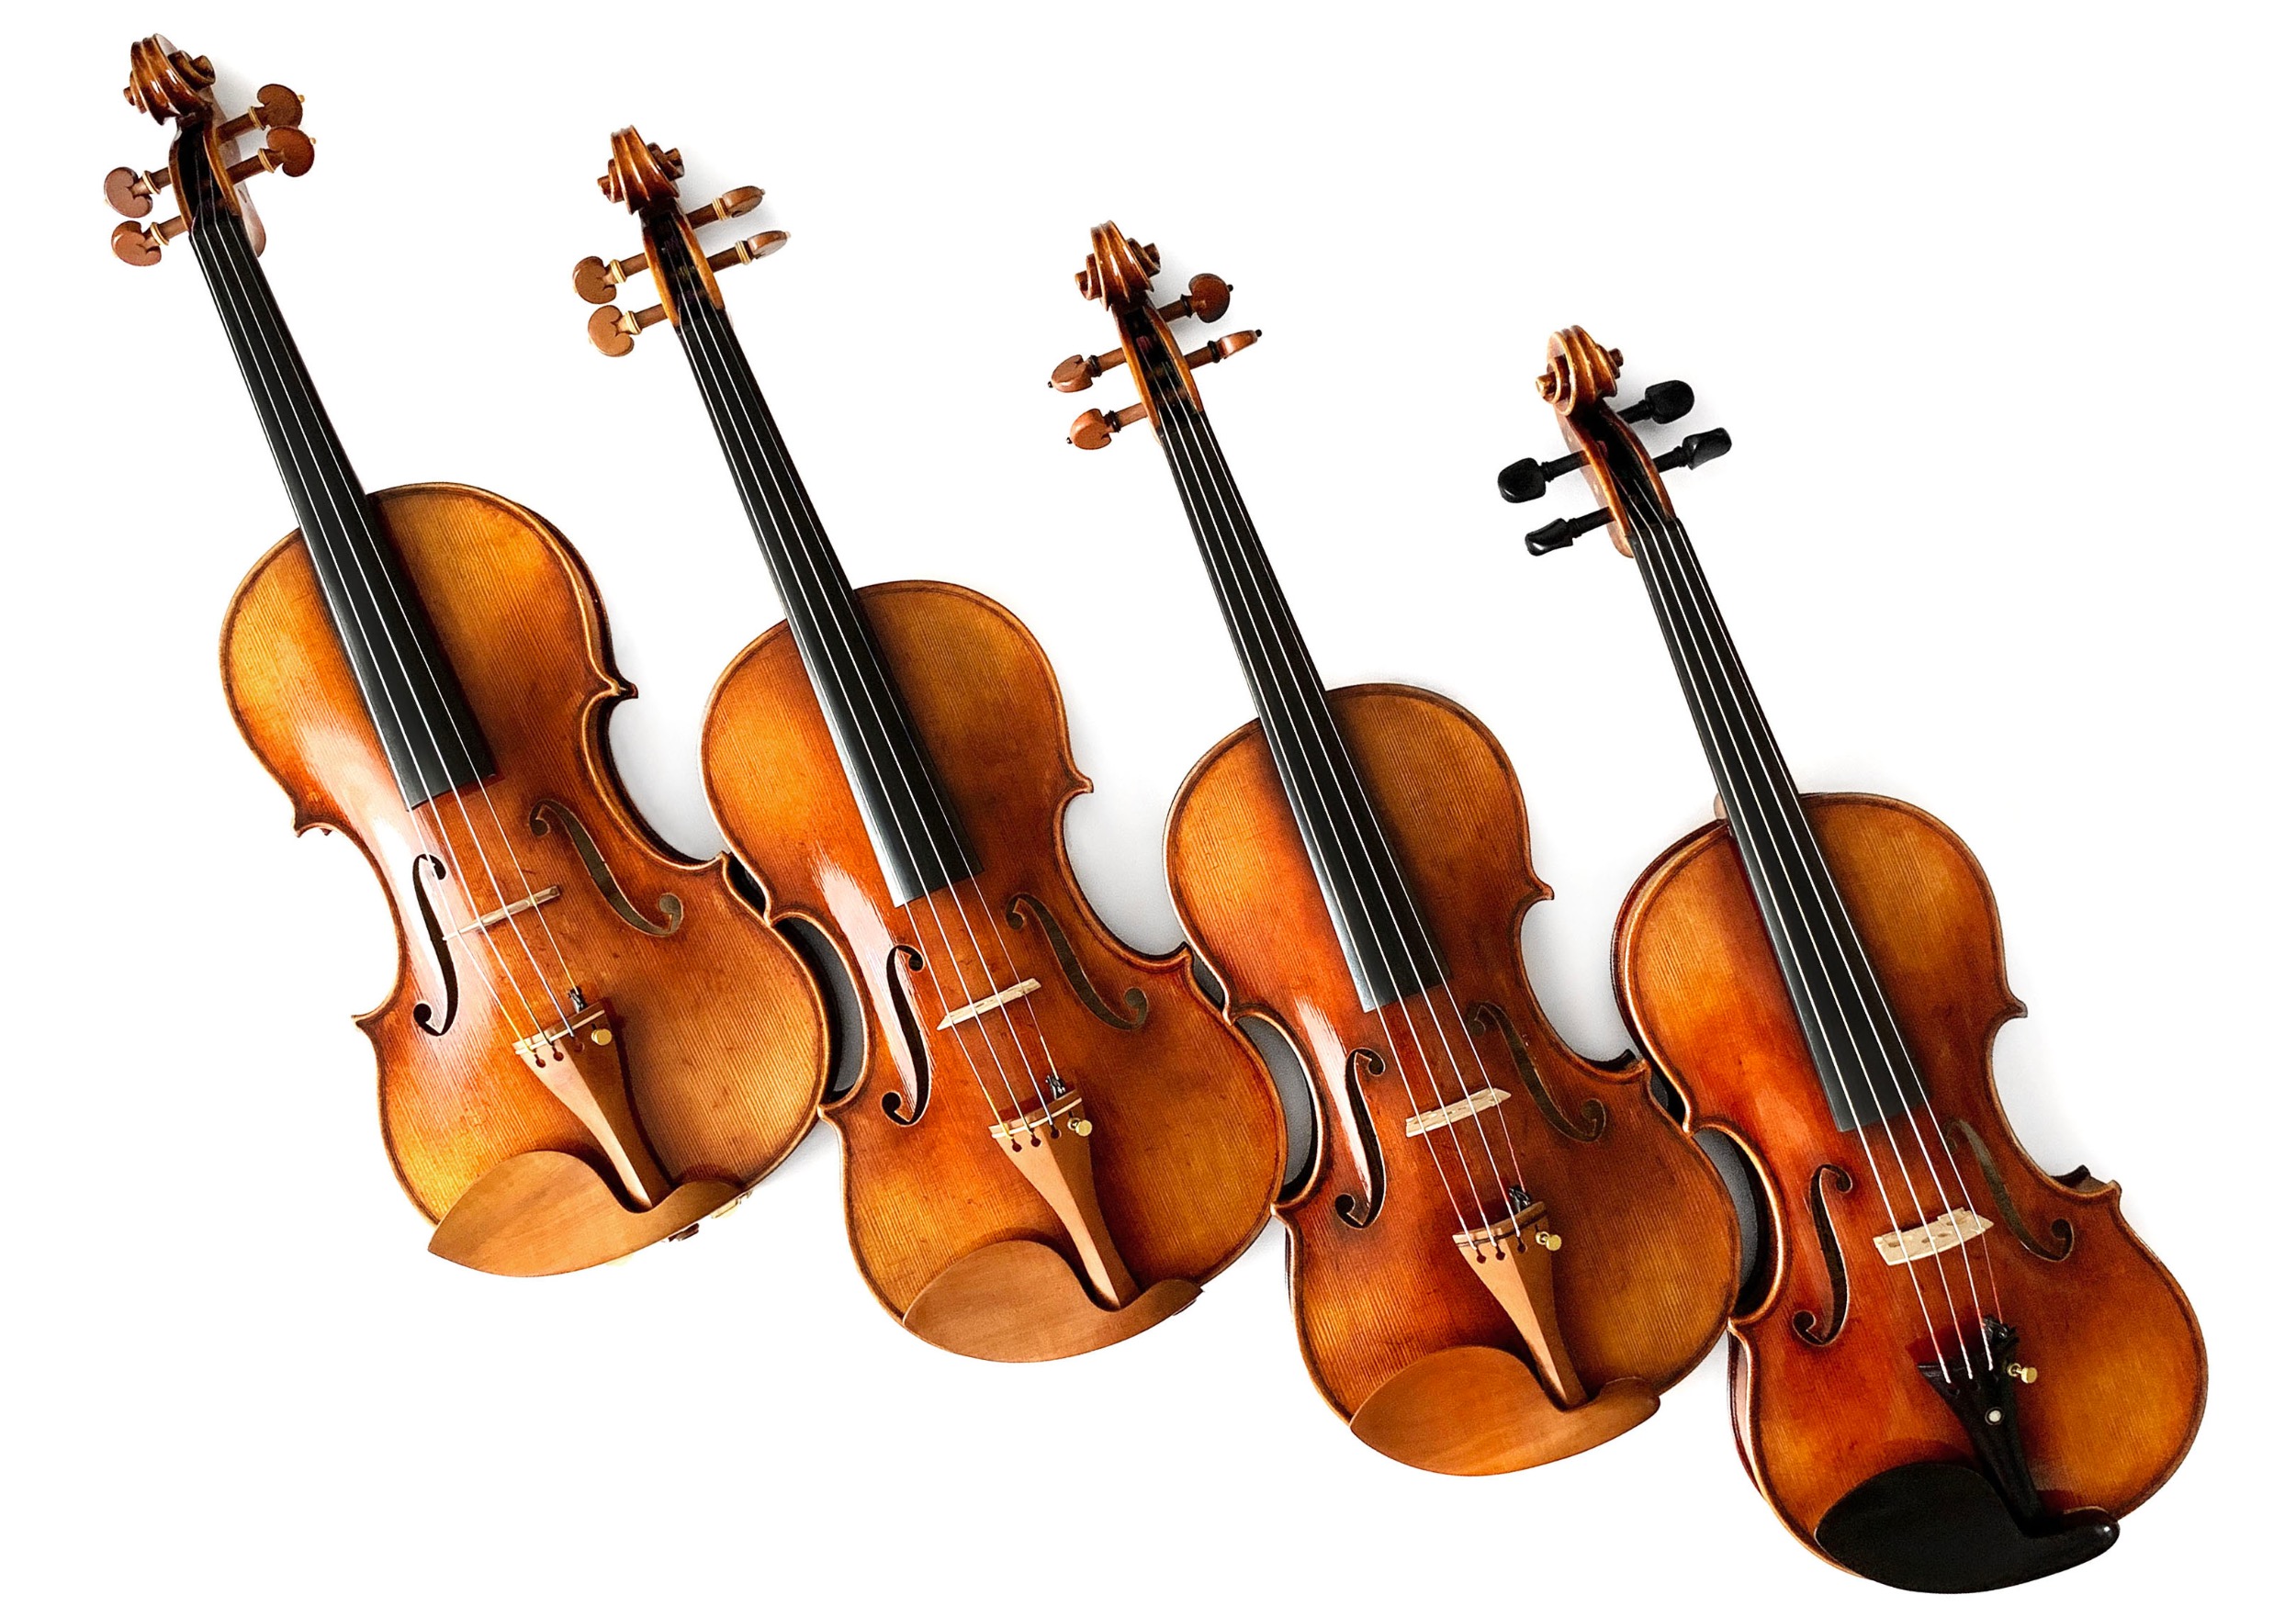 four Zhu violins in a row leaning diagonally